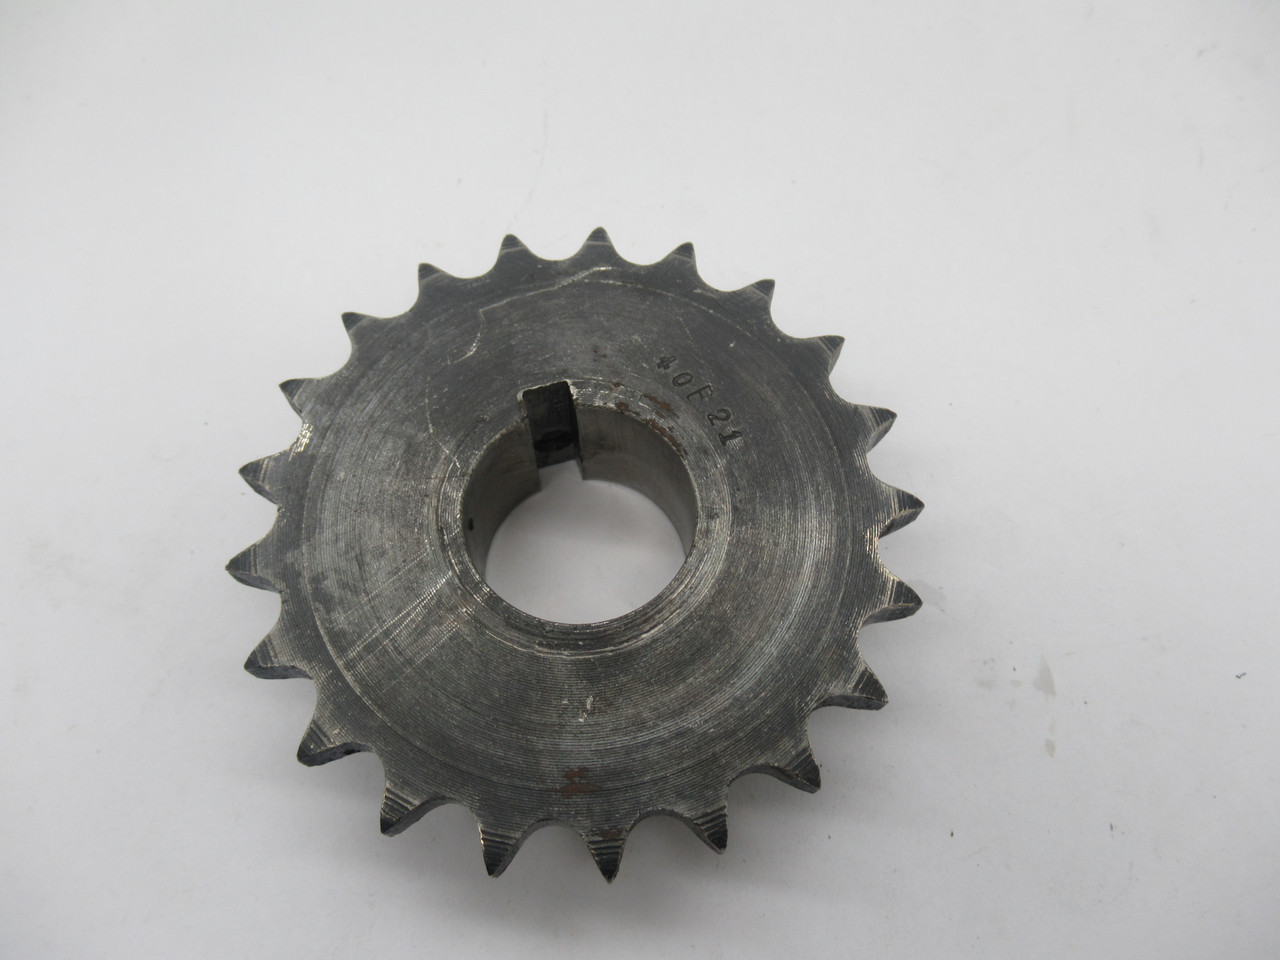 Generic 40B21 Roller Chain Sprocket 5/8" Bore 21 Teeth 40 Chain 1/2" Pitch USED